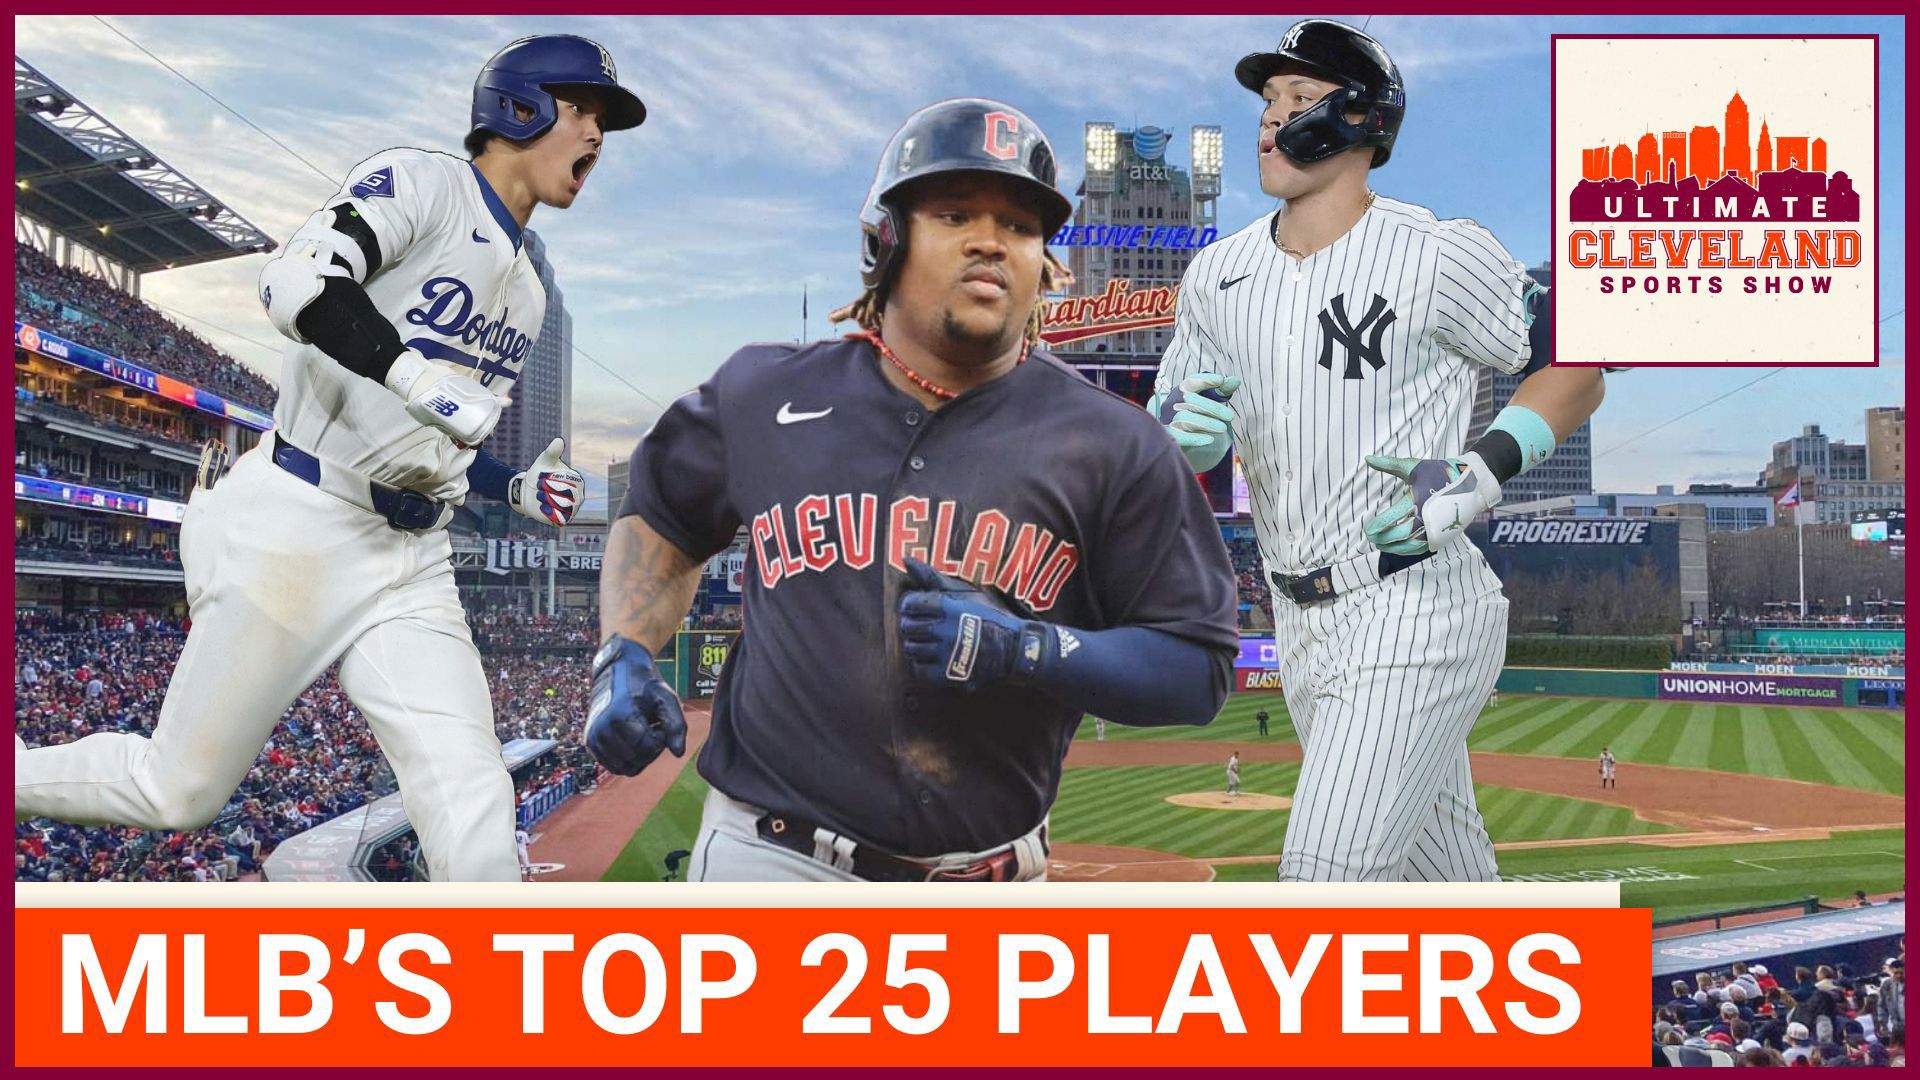 Jose Ramirez & Steven Kwan made Bleacher Report's list of the Top 25 players in MLB right now.